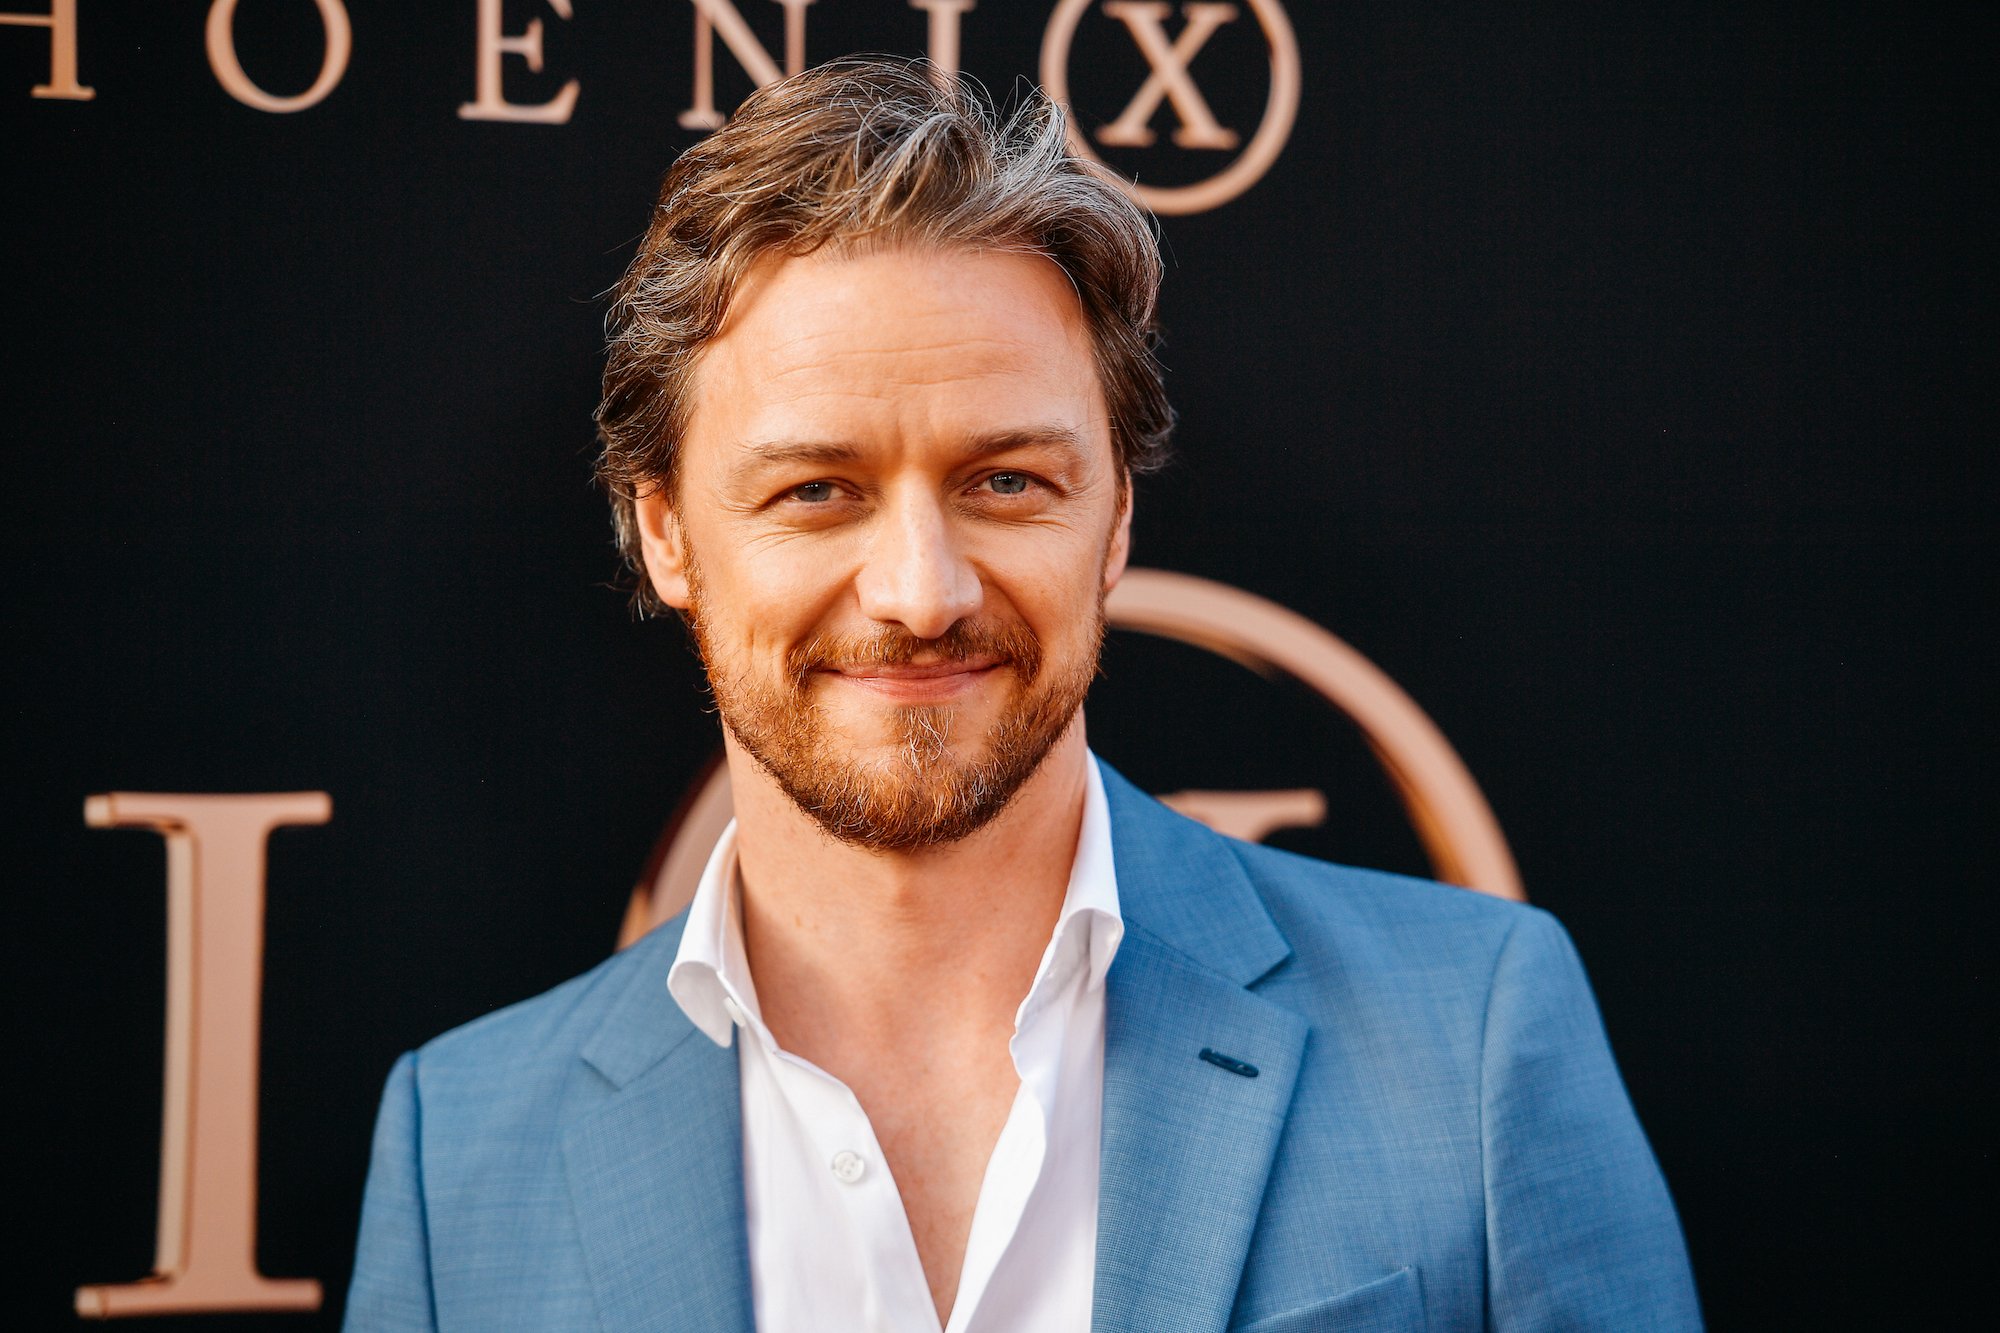 James McAvoy smiling in front of a black background